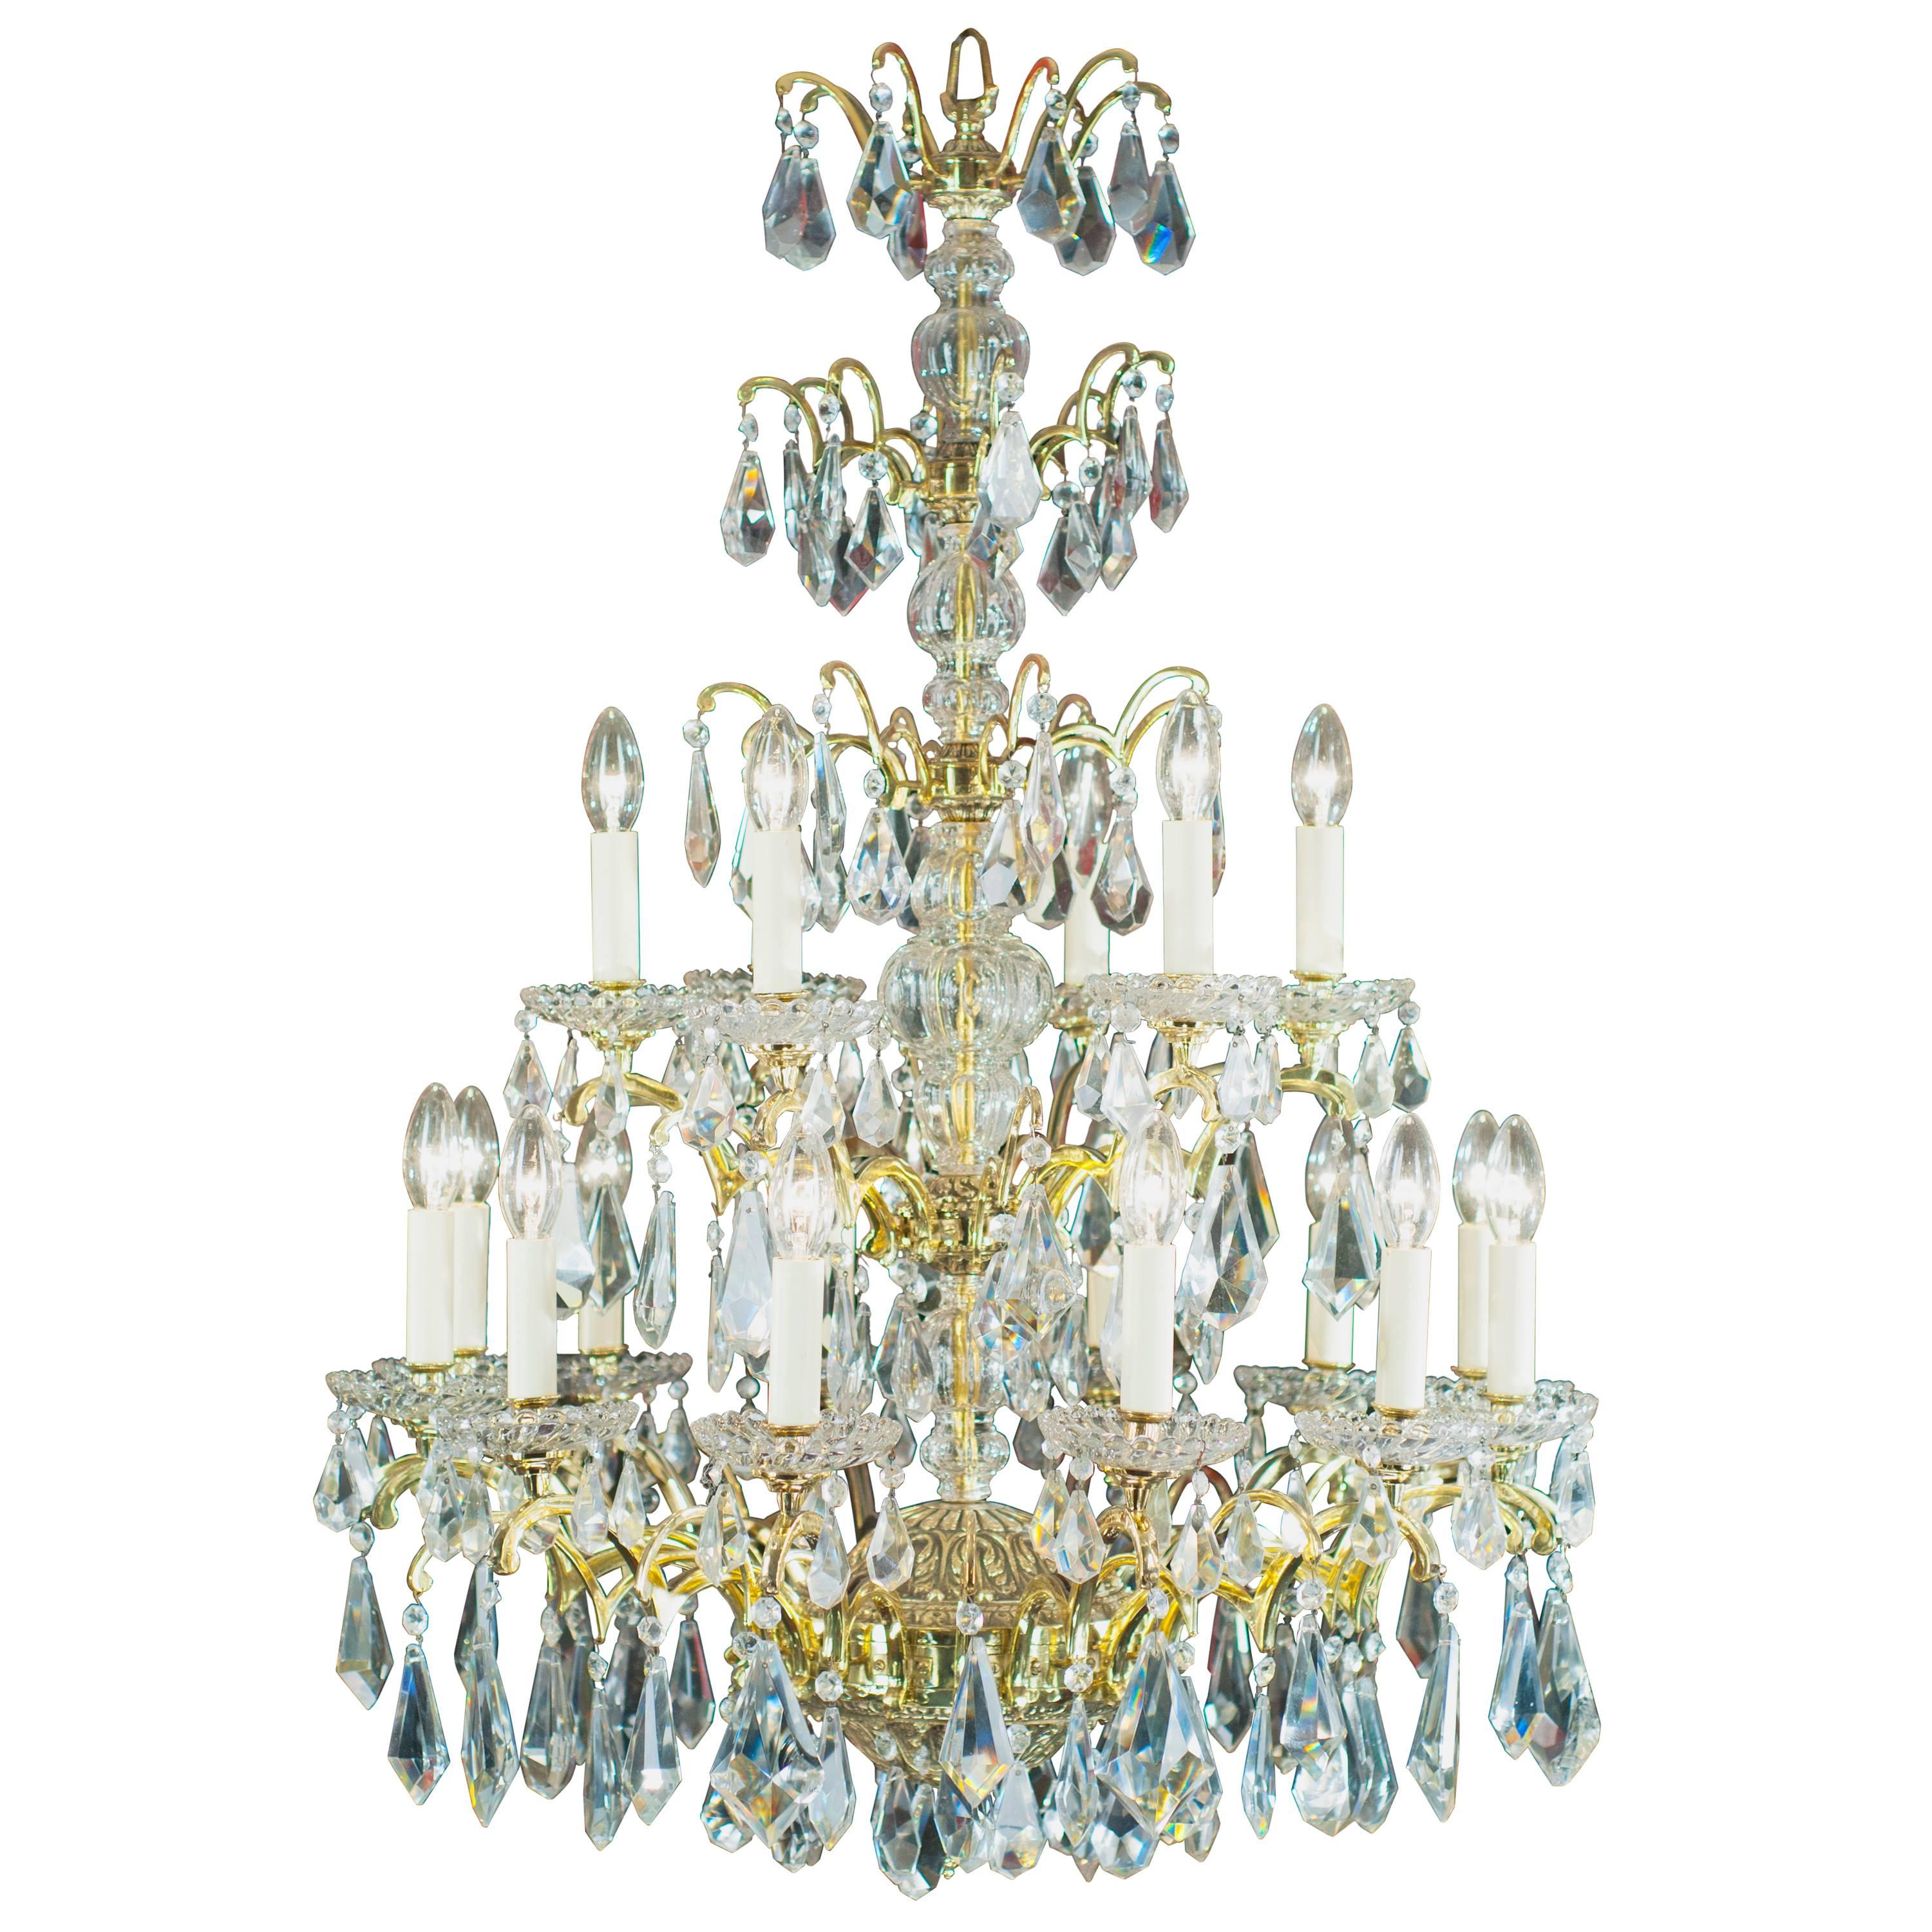 Large Cut Crystal Eighteen-Branch Early 20th Century Spanish Chandelier For Sale